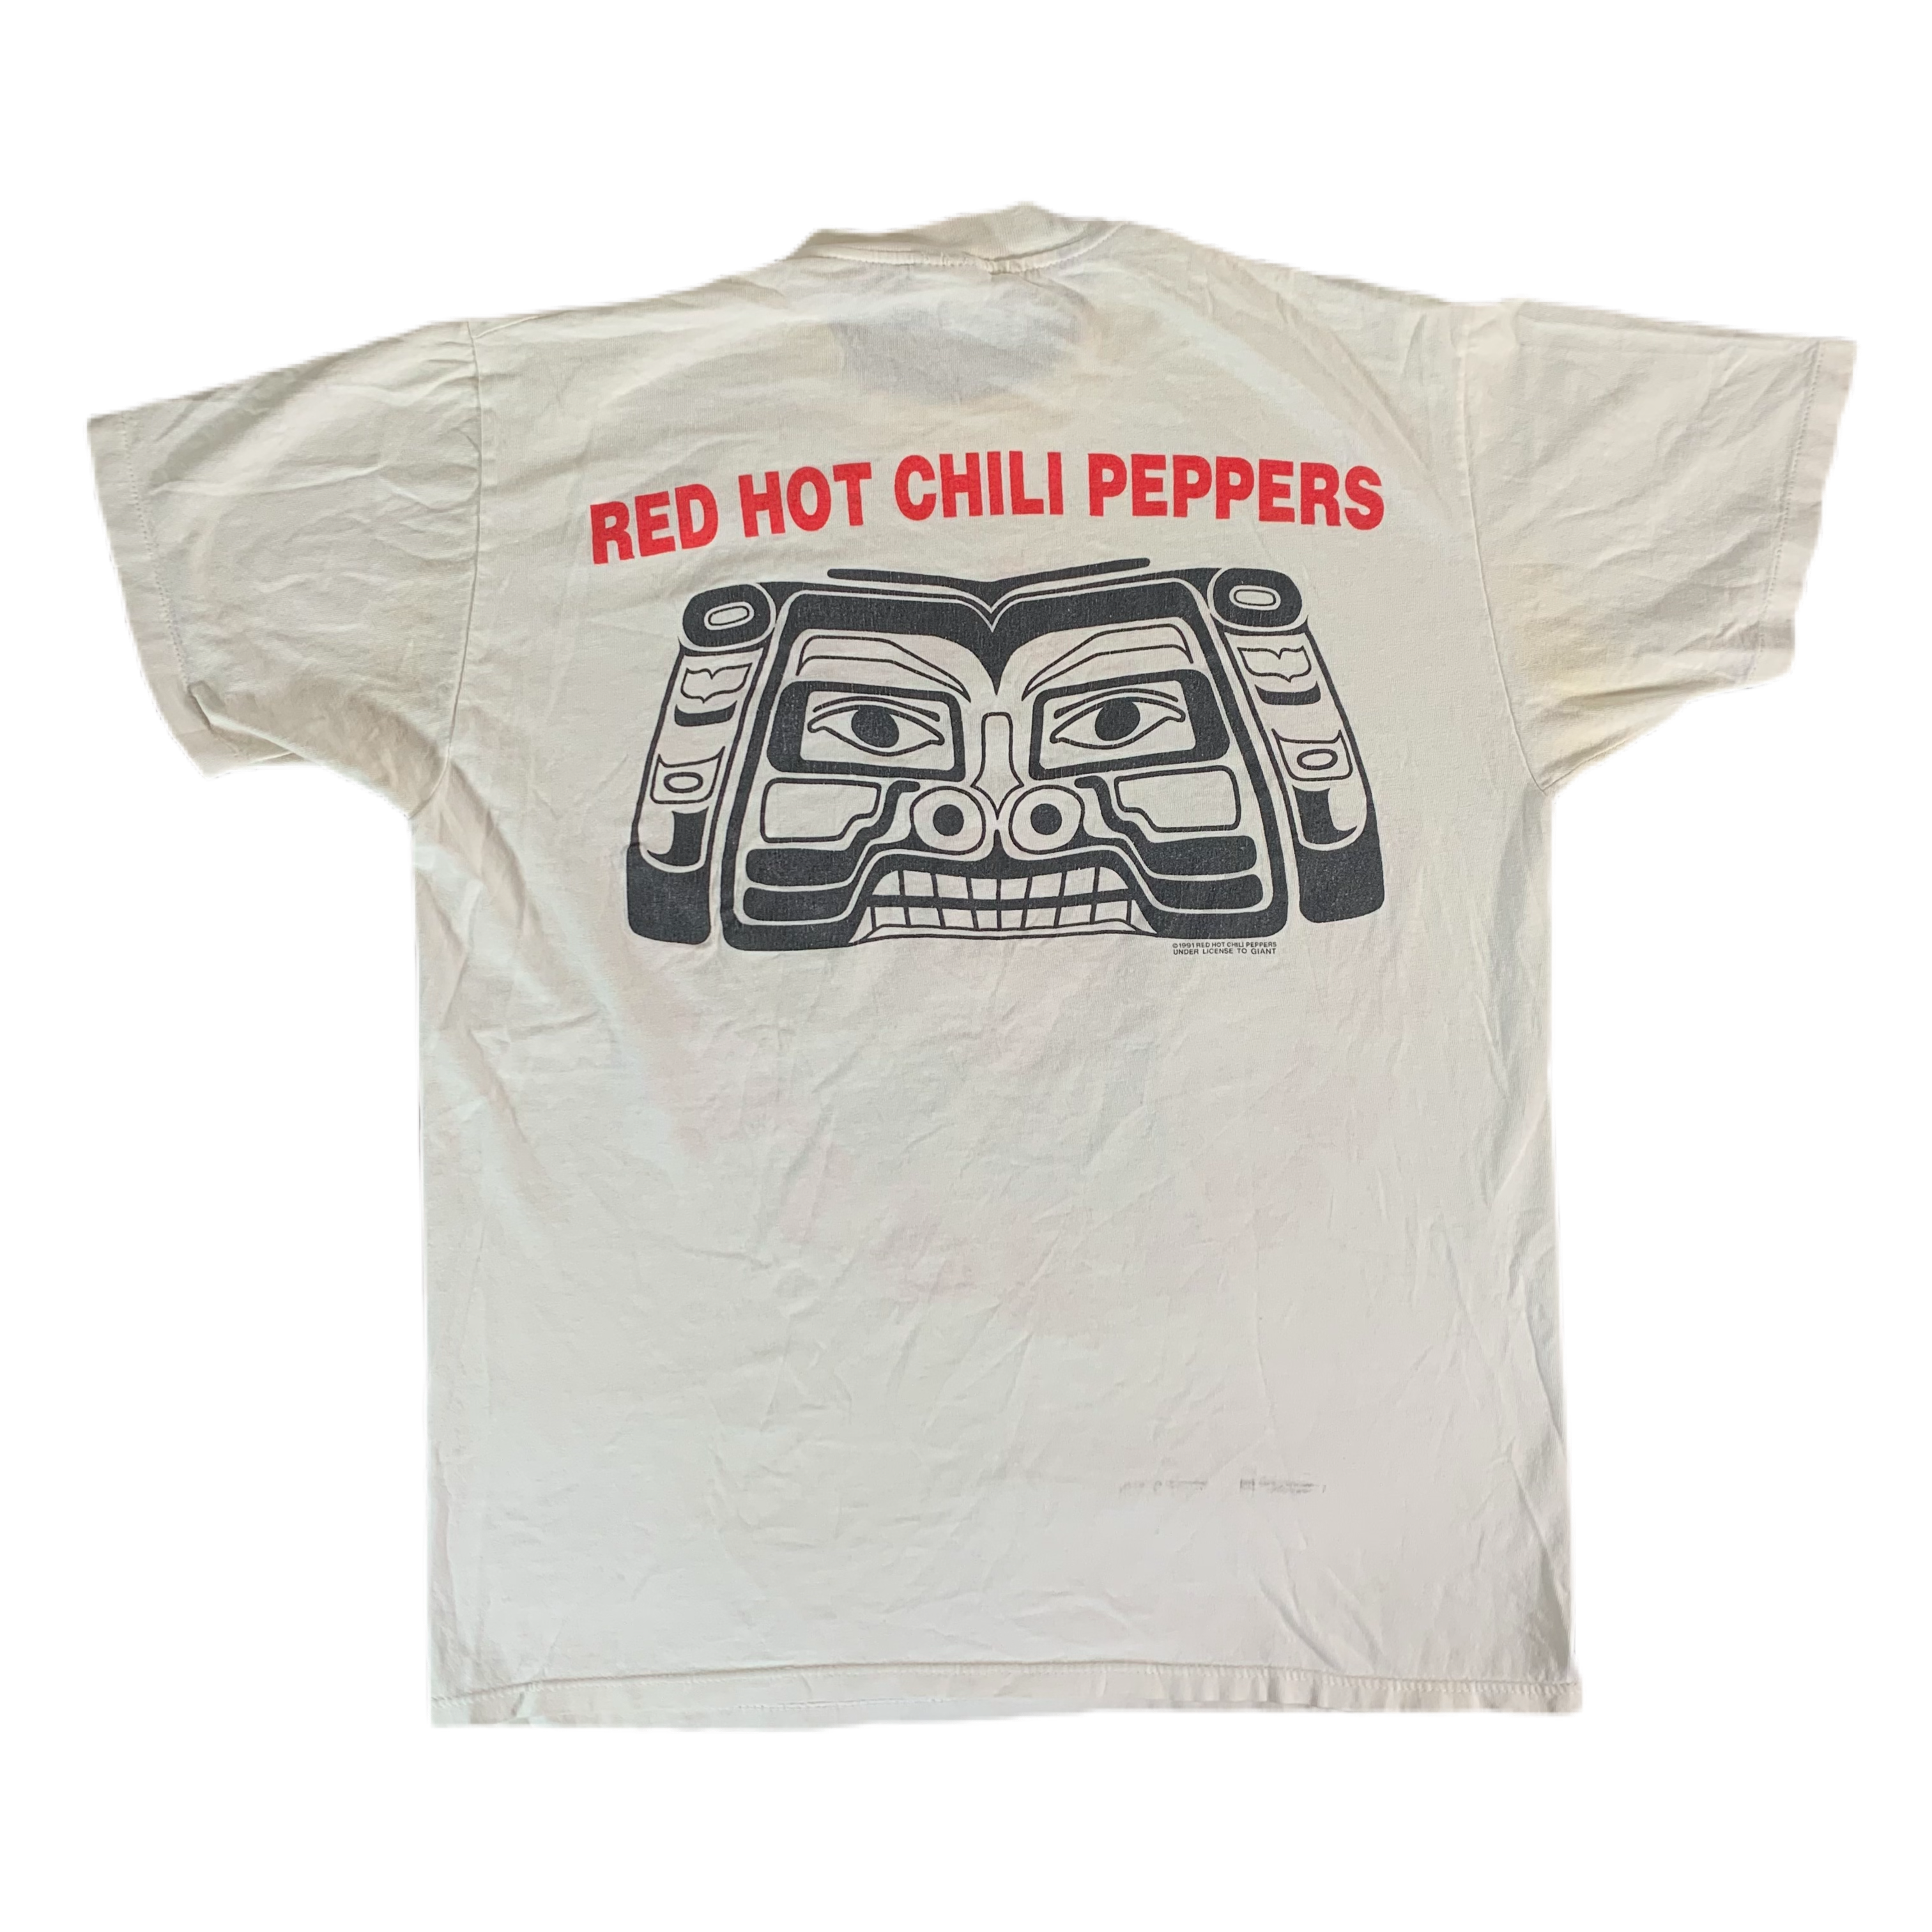 Vintage Red Hot Chili Peppers "Aztec" T Shirt   jointcustodydc